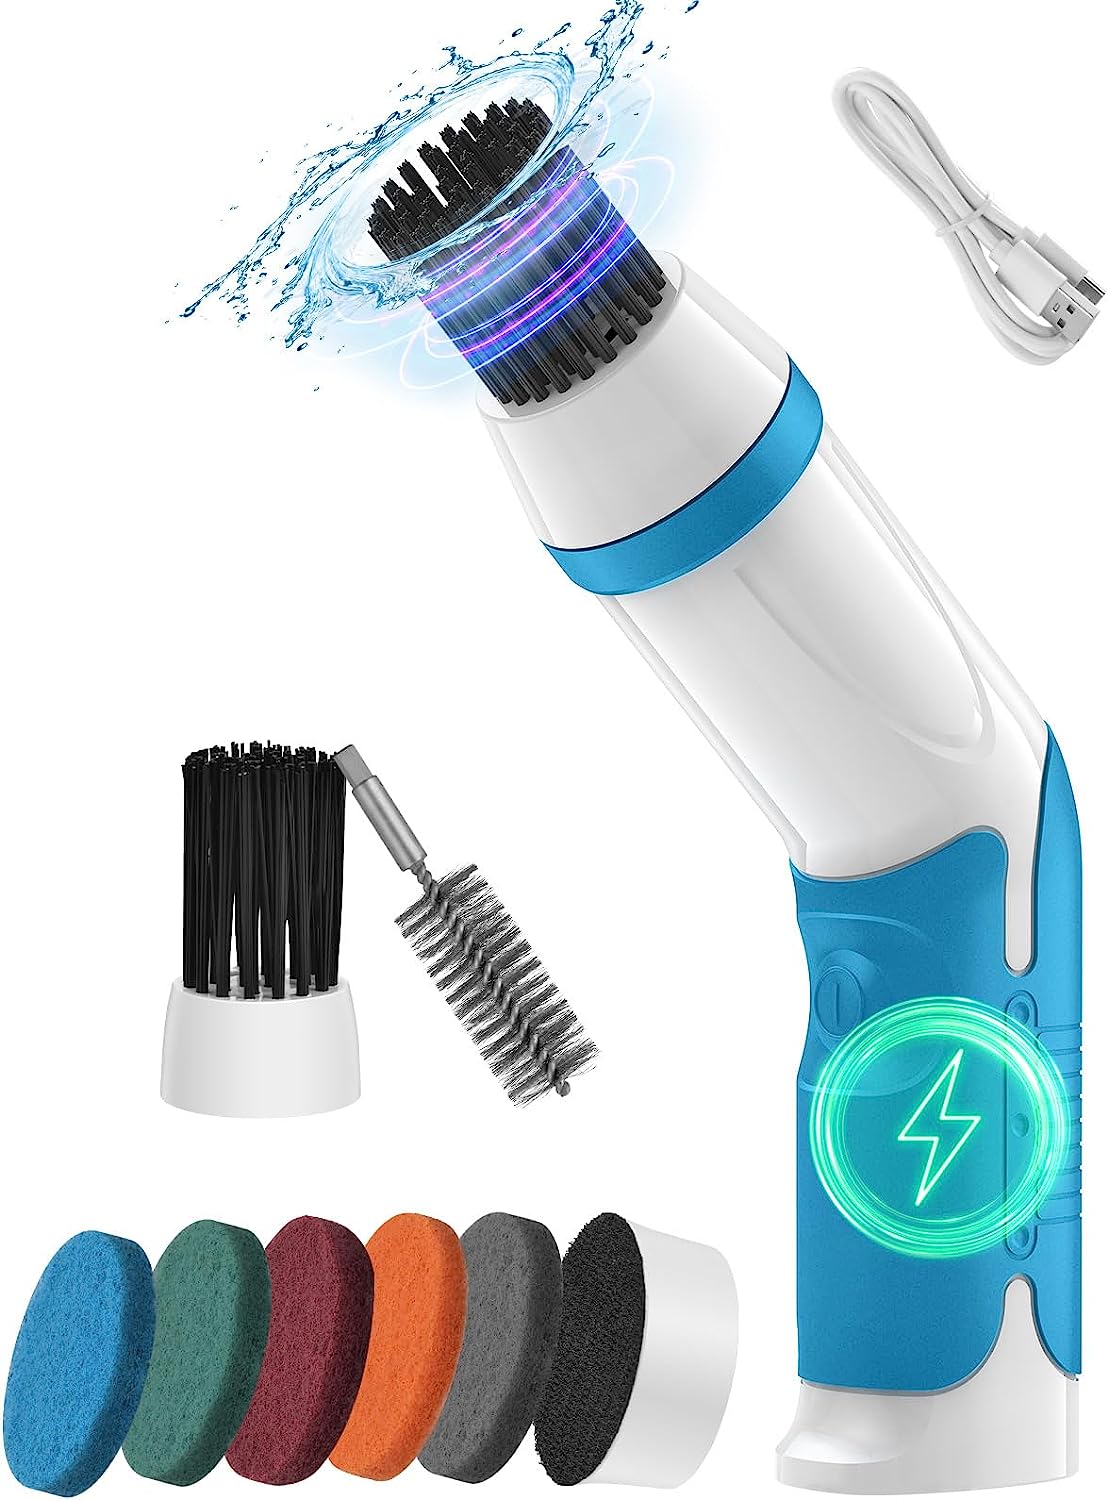 Electric Spin Scrubber, 3-in-1 Electric Kitchen Scrub Brush Set for Kitchen Dishes Grill Sink Oven, IPX7 Waterproof Cordless Kitchen Brush w/Ergonomic Handle, Type-C Charge, 60Mins - Blue